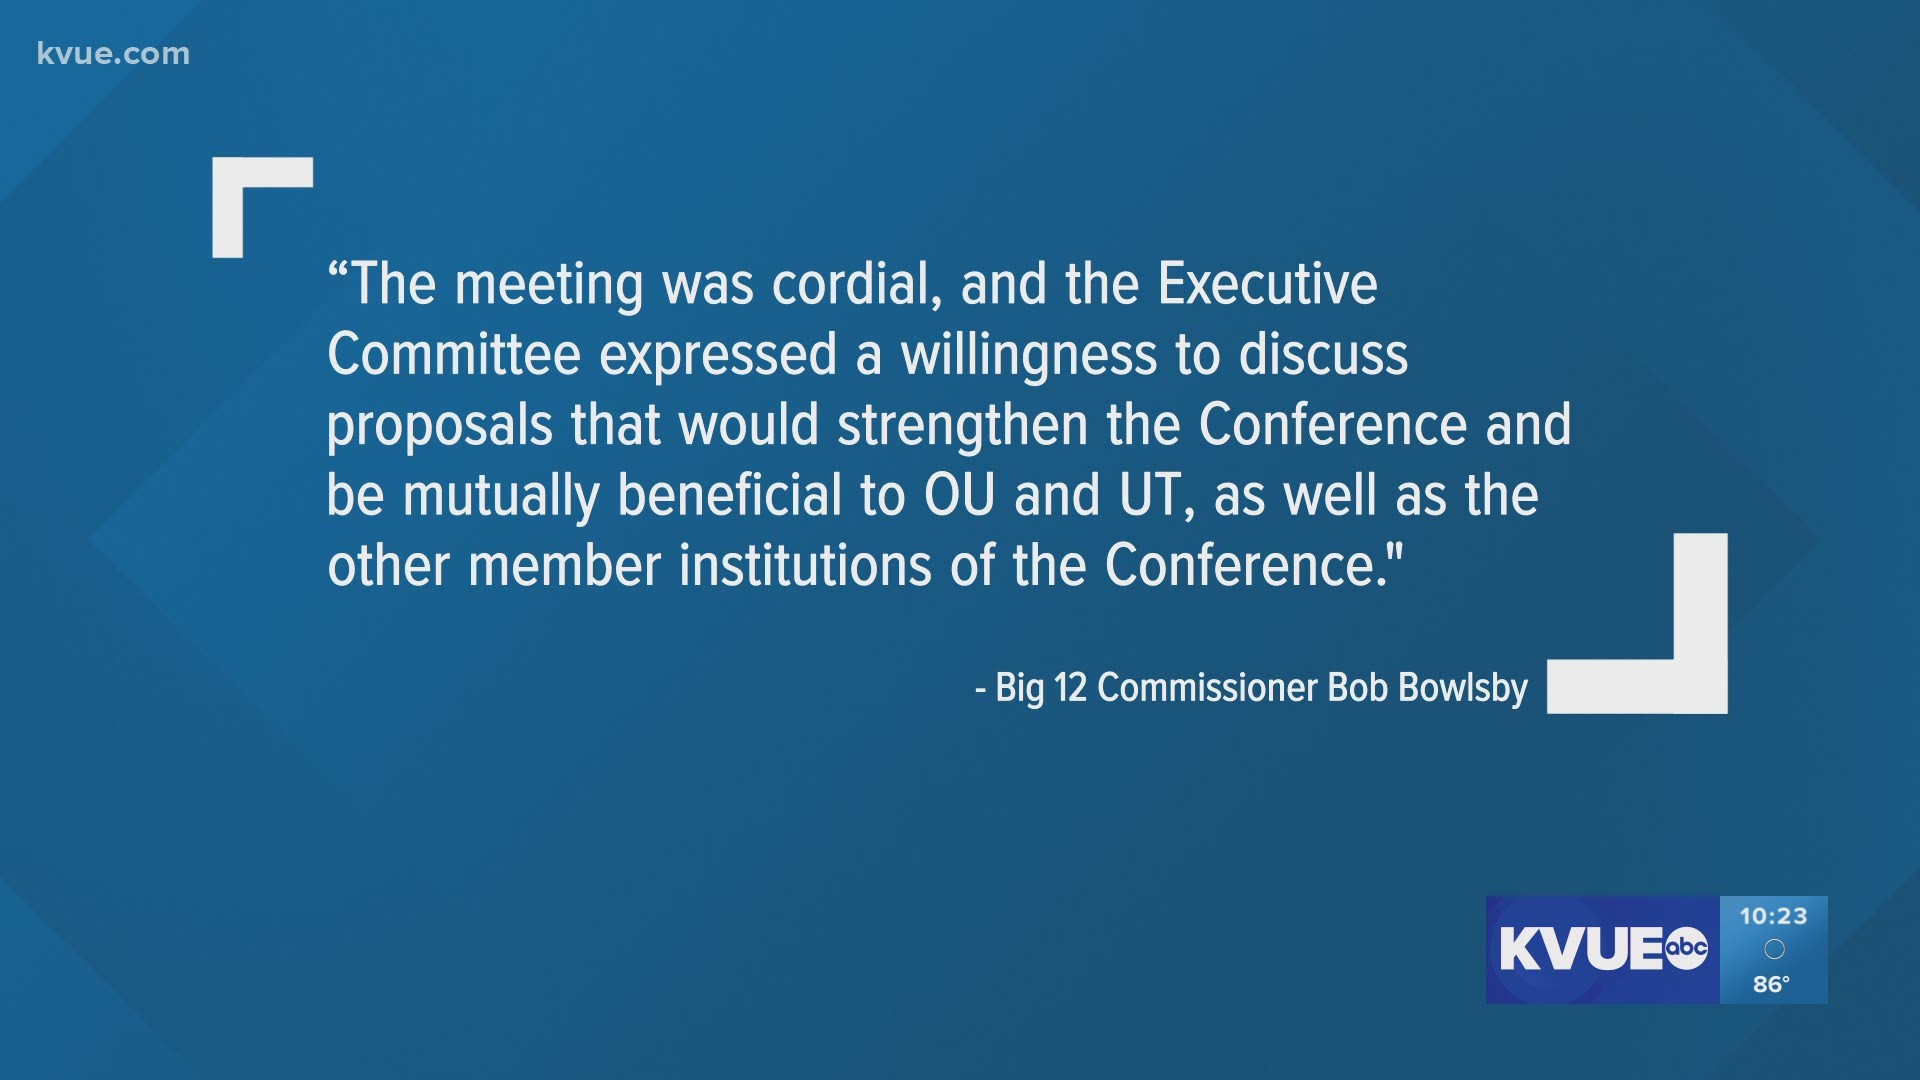 "The meeting was cordial ... [committee] expressed a willingness to discuss proposals that would strengthen the Conference and be mutually beneficial to OU and UT."